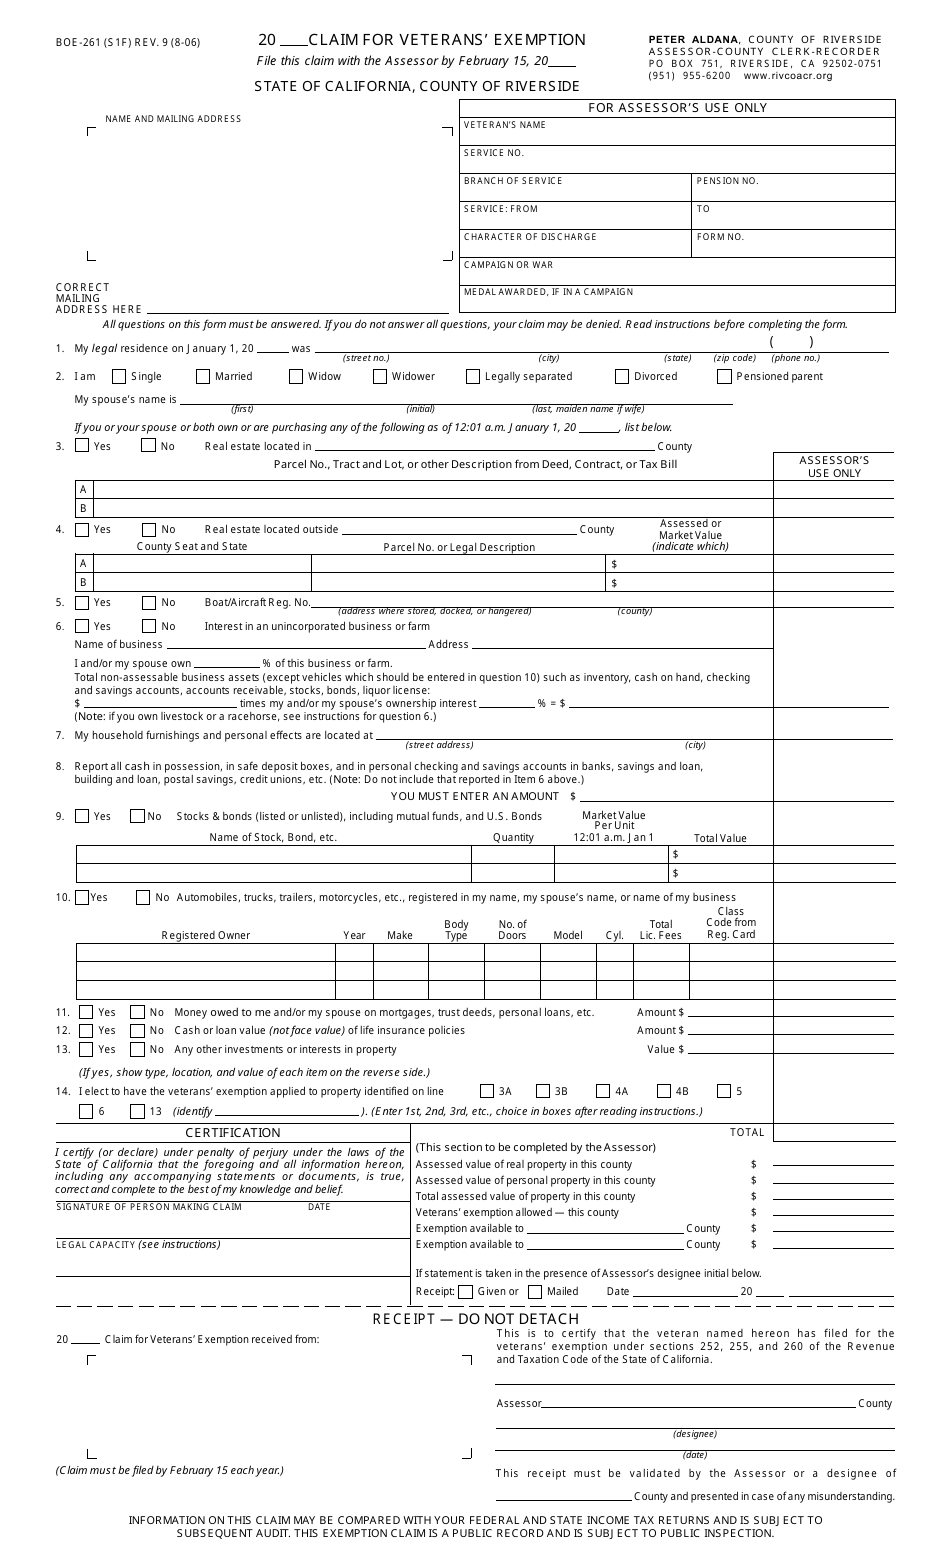 Form BOE-261 Claim for Veterans Exemption - County of Riverside, California, Page 1